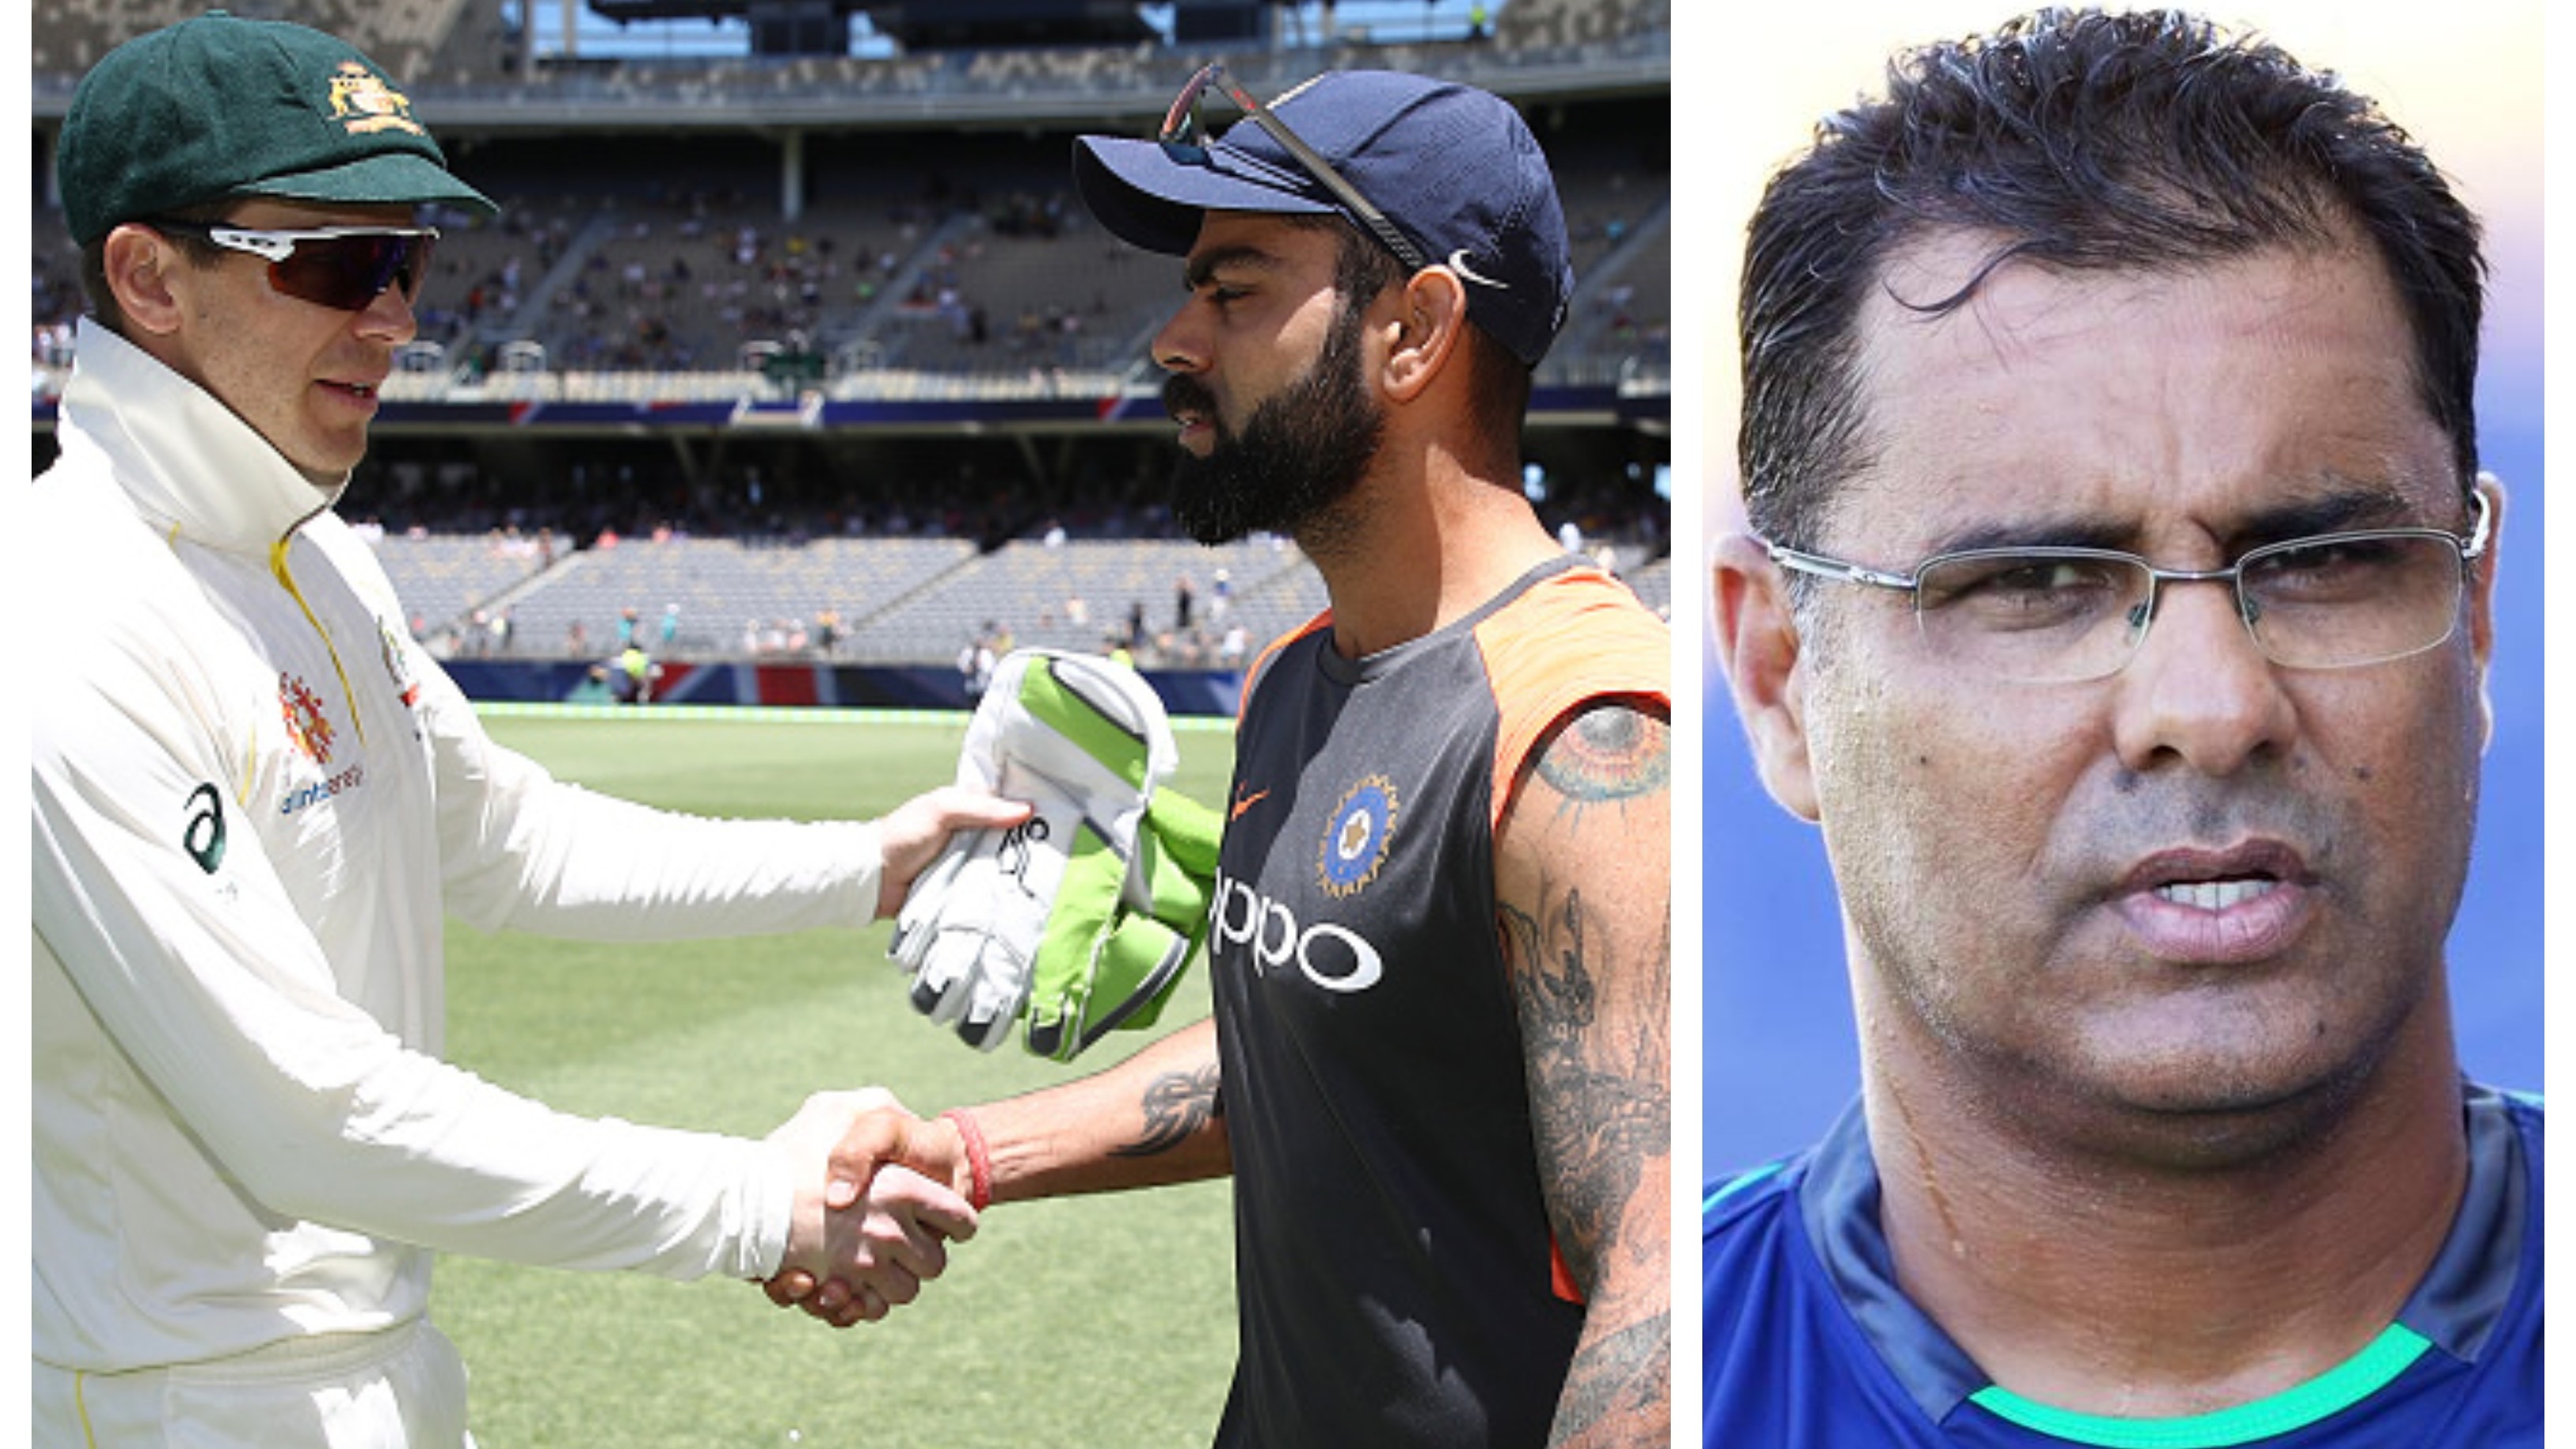 AUS v IND 2020-21: Waqar Younis explains why he expects tight contest in the Test series